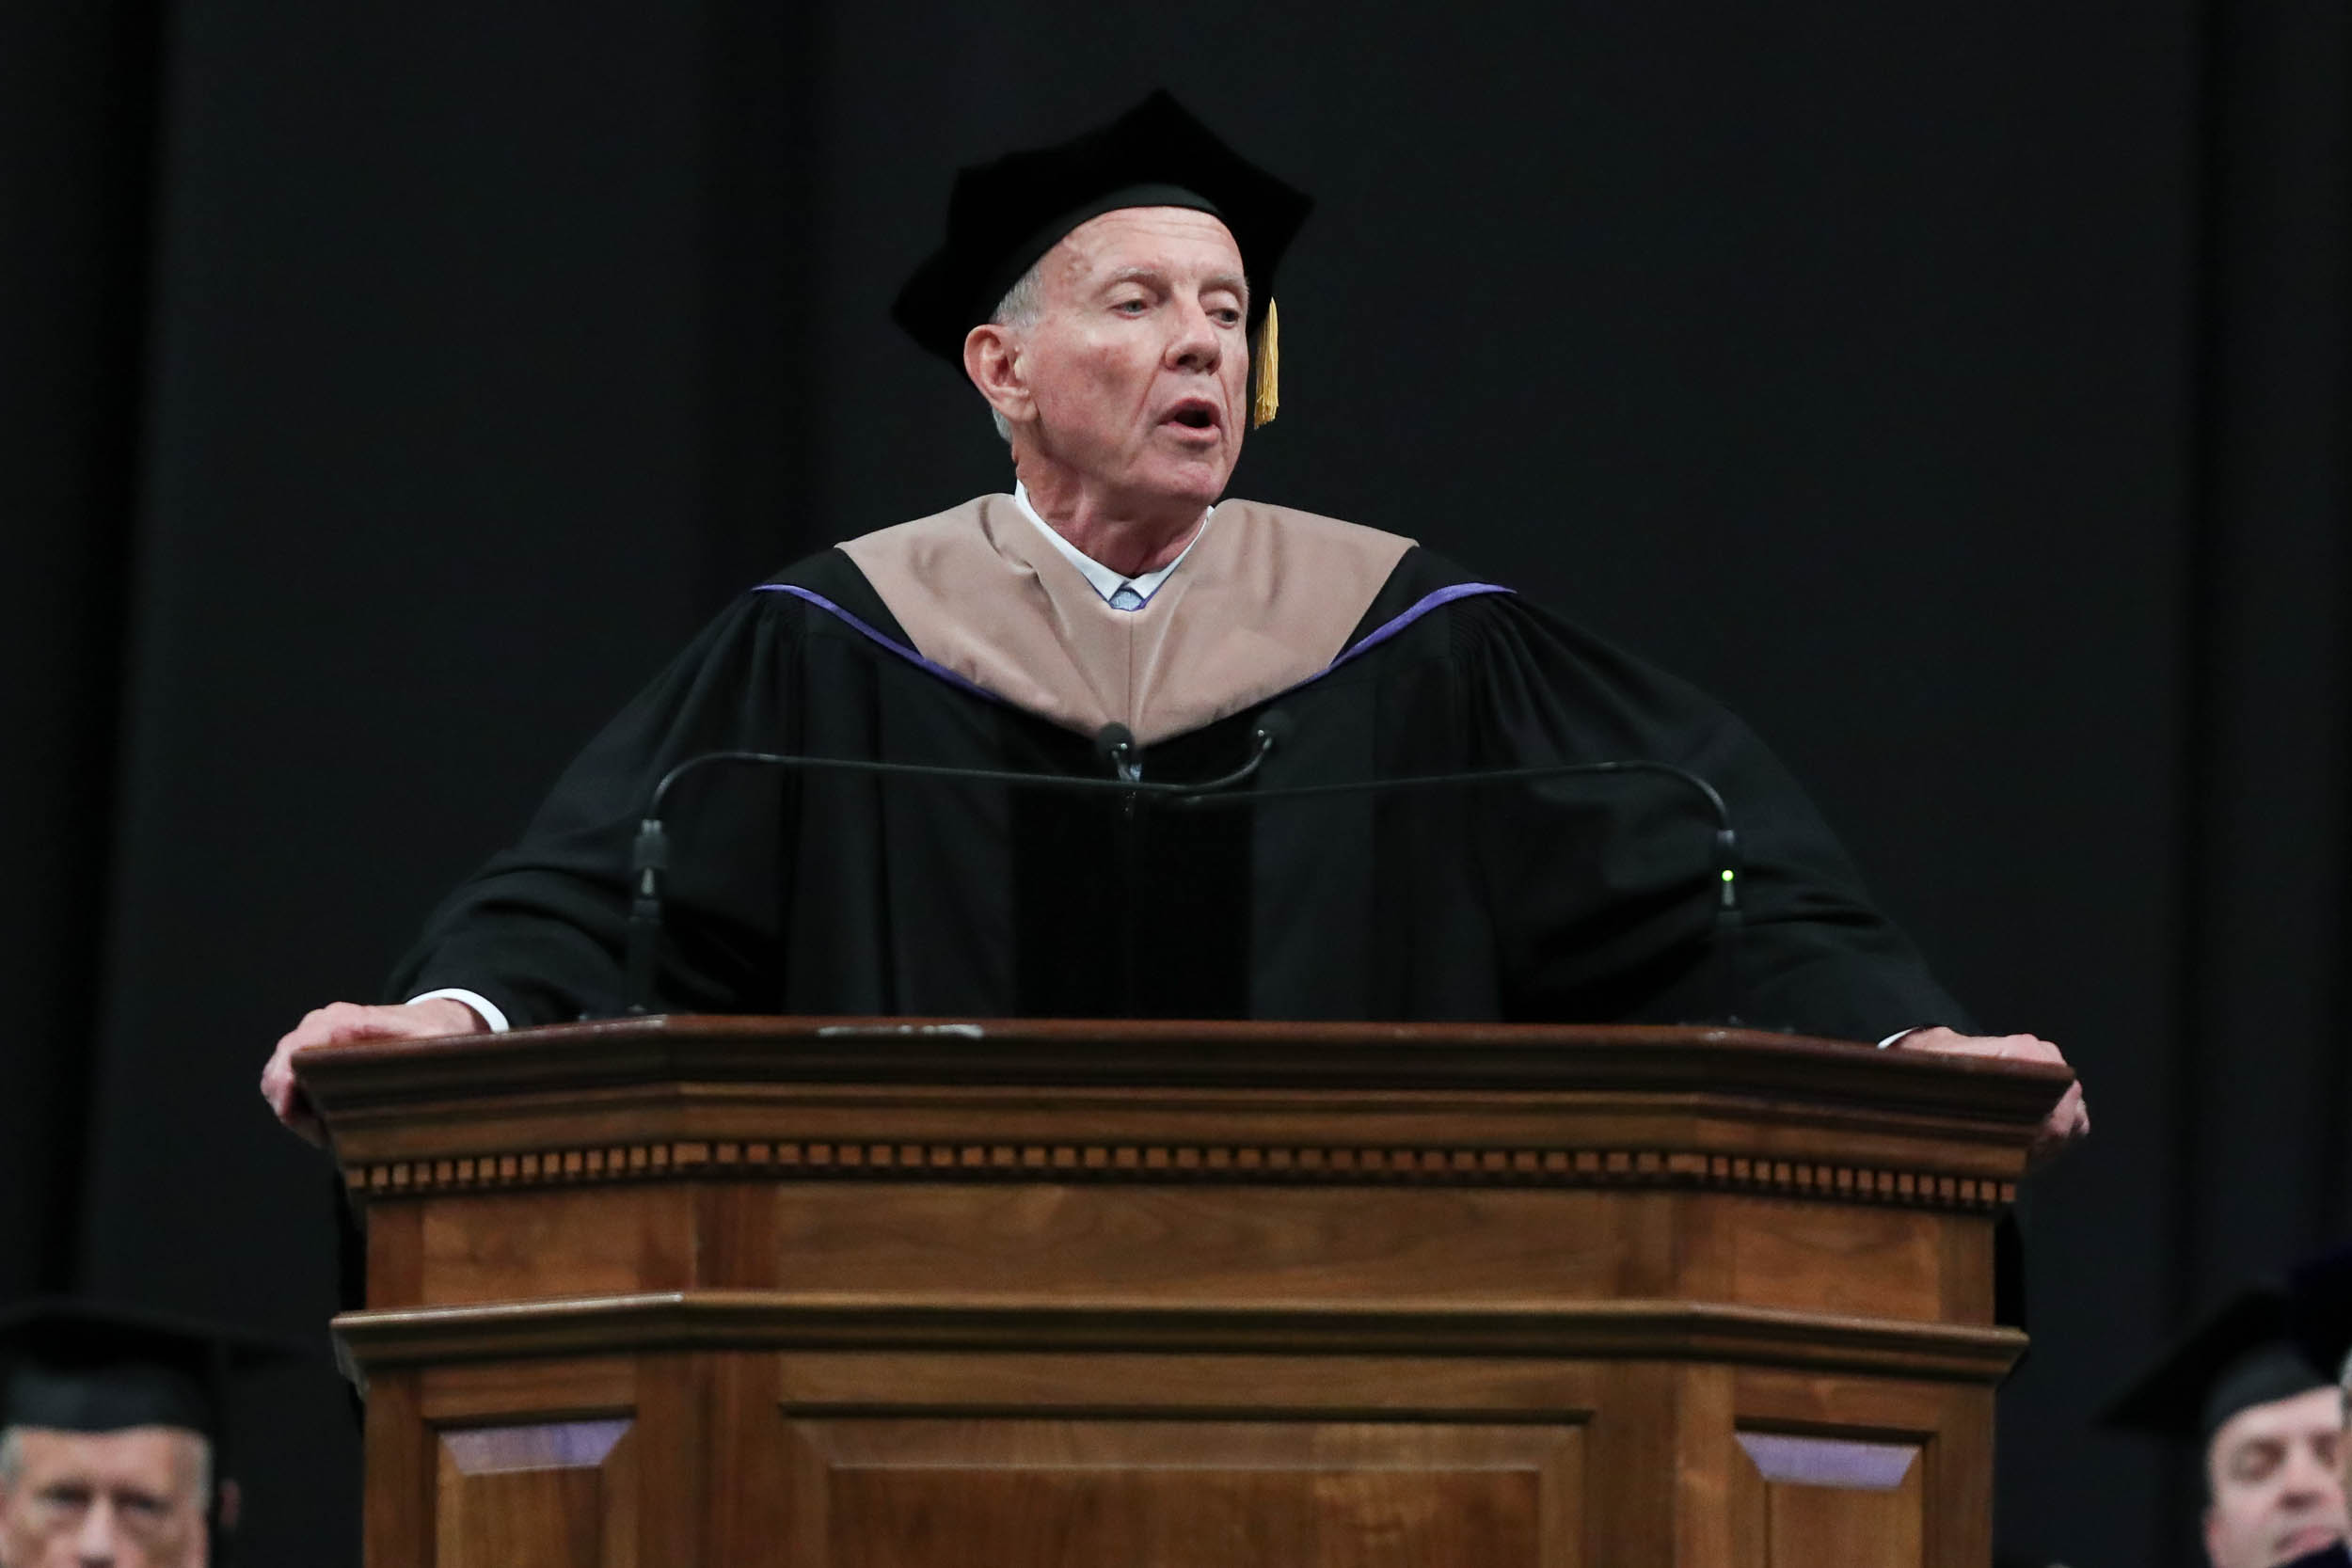 Robert D. Sweeney, who led capital campaigns that raised more than $4 billion for the University, received the Thomas Jefferson Award for Service. 